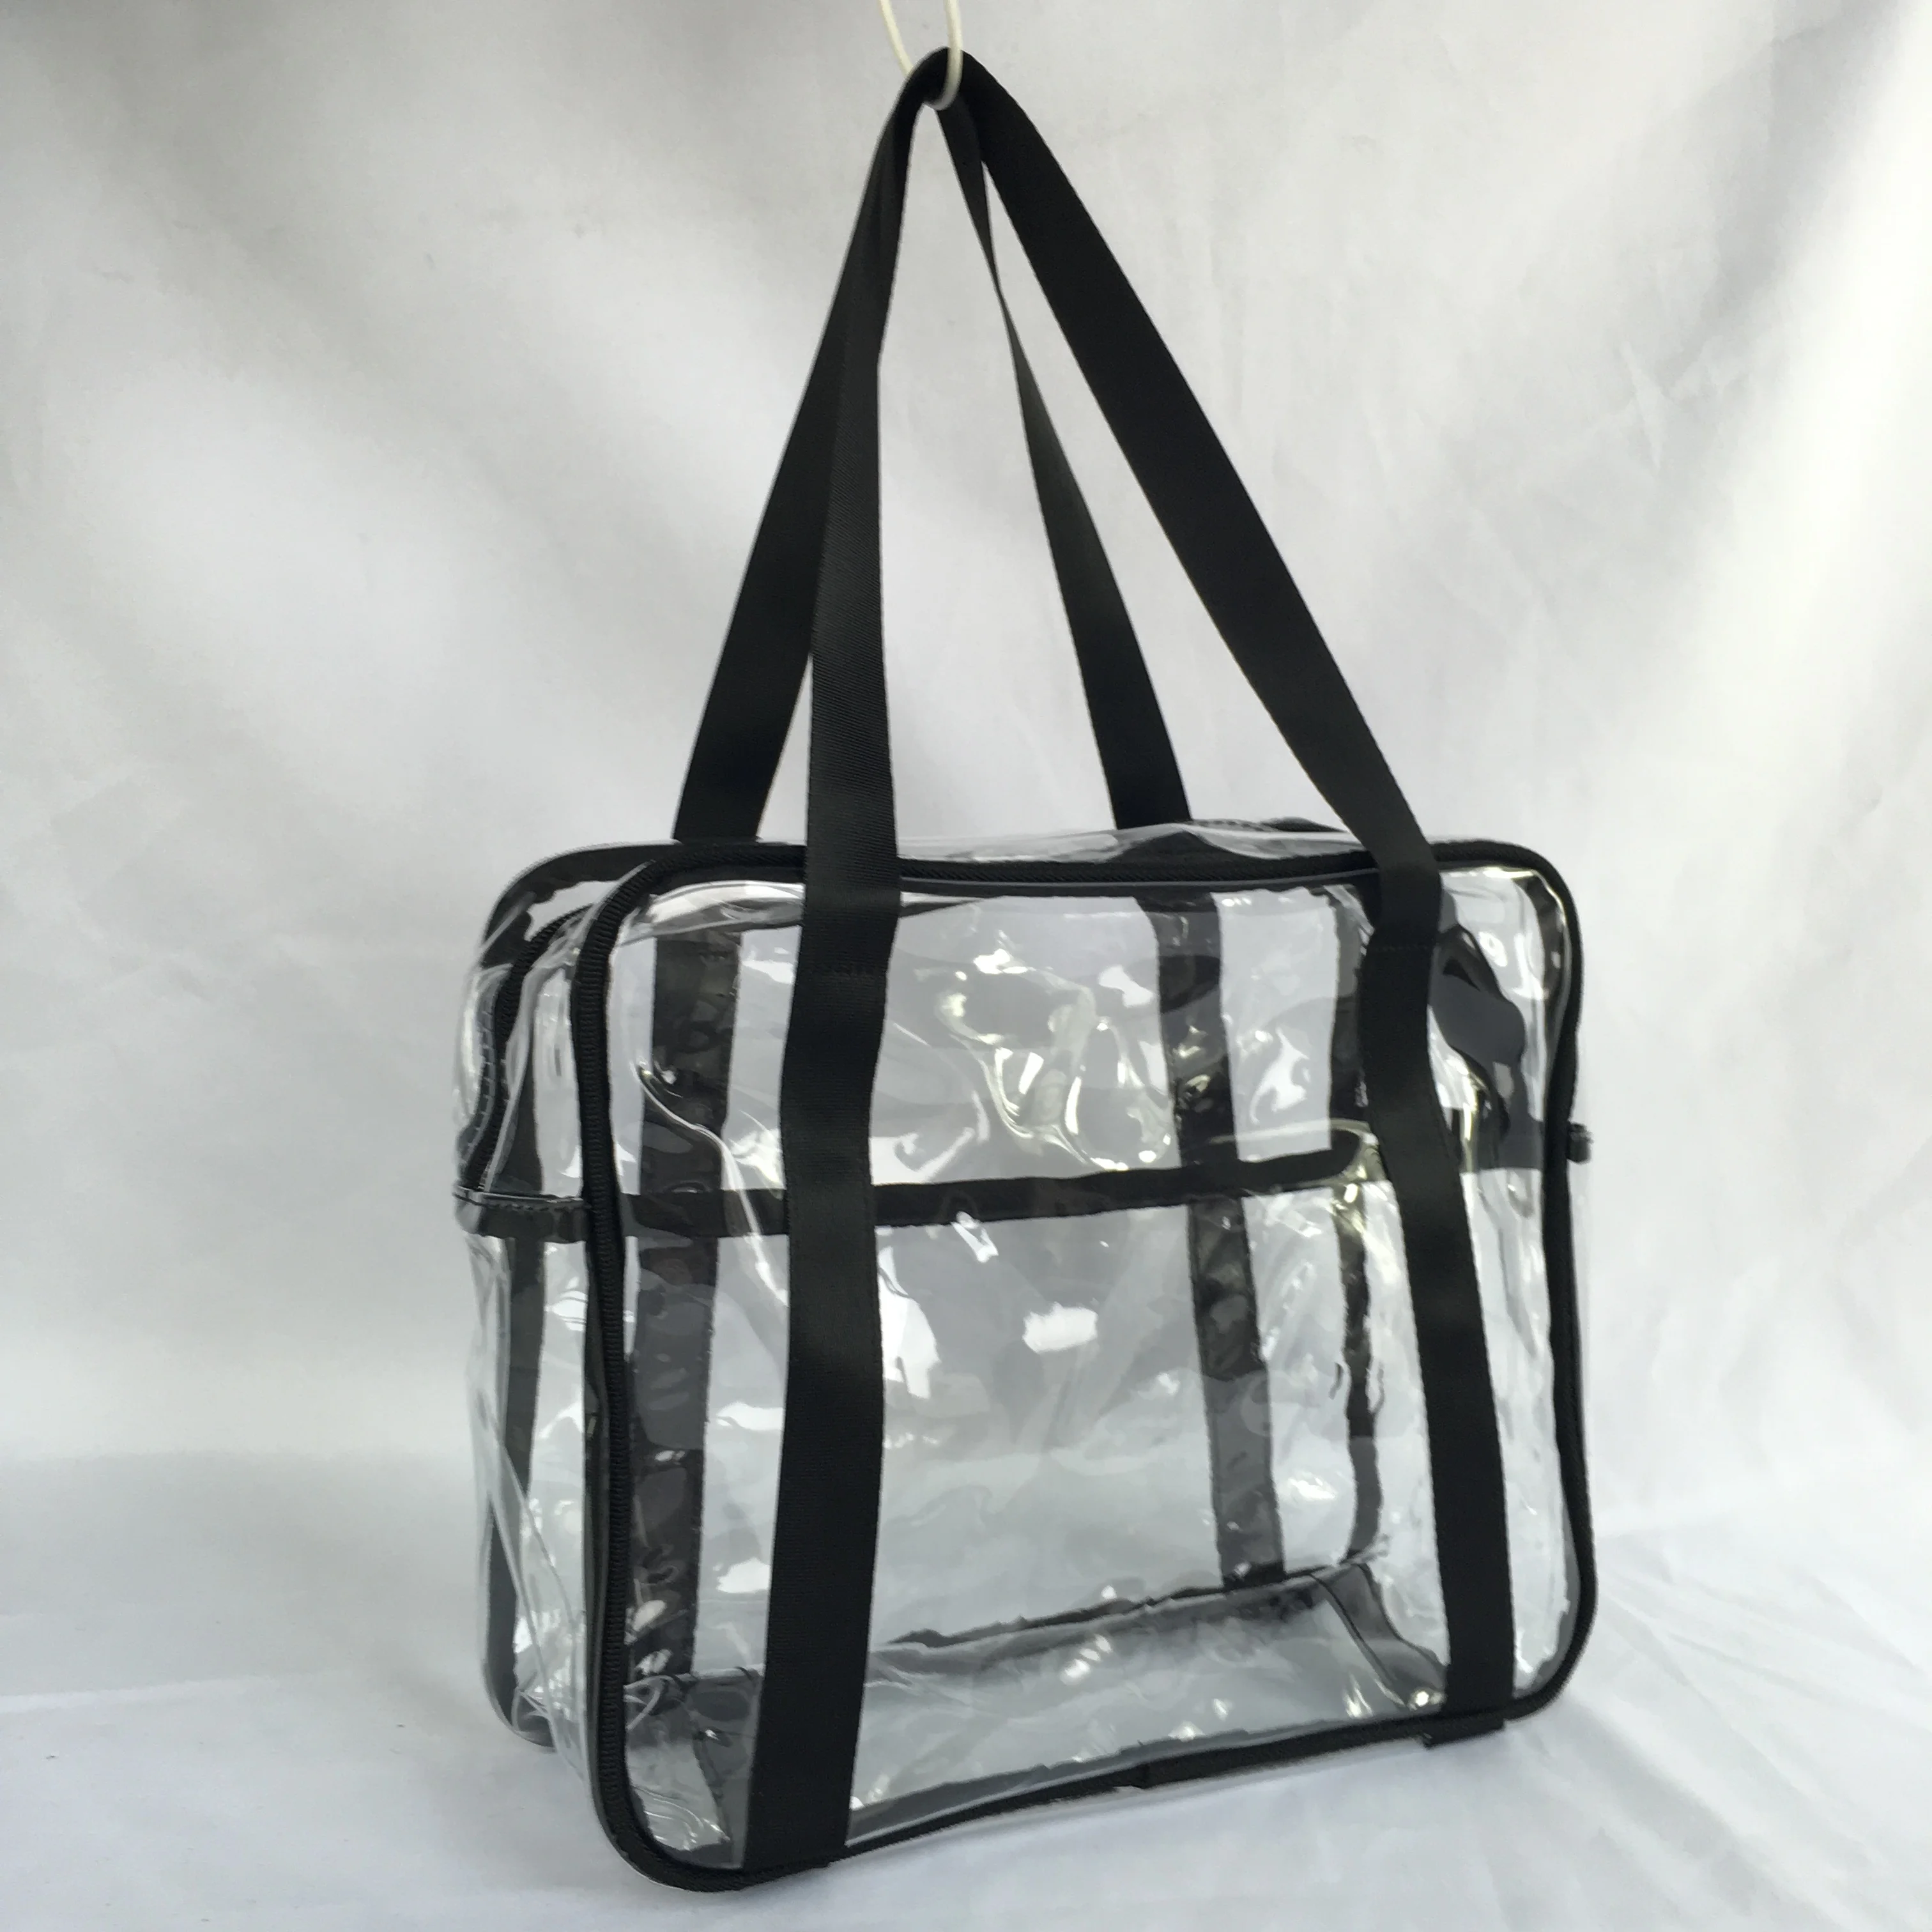 

Alibaba China Supplier Custom PVC Transparent Clear Stadium Bag, Black or as your request